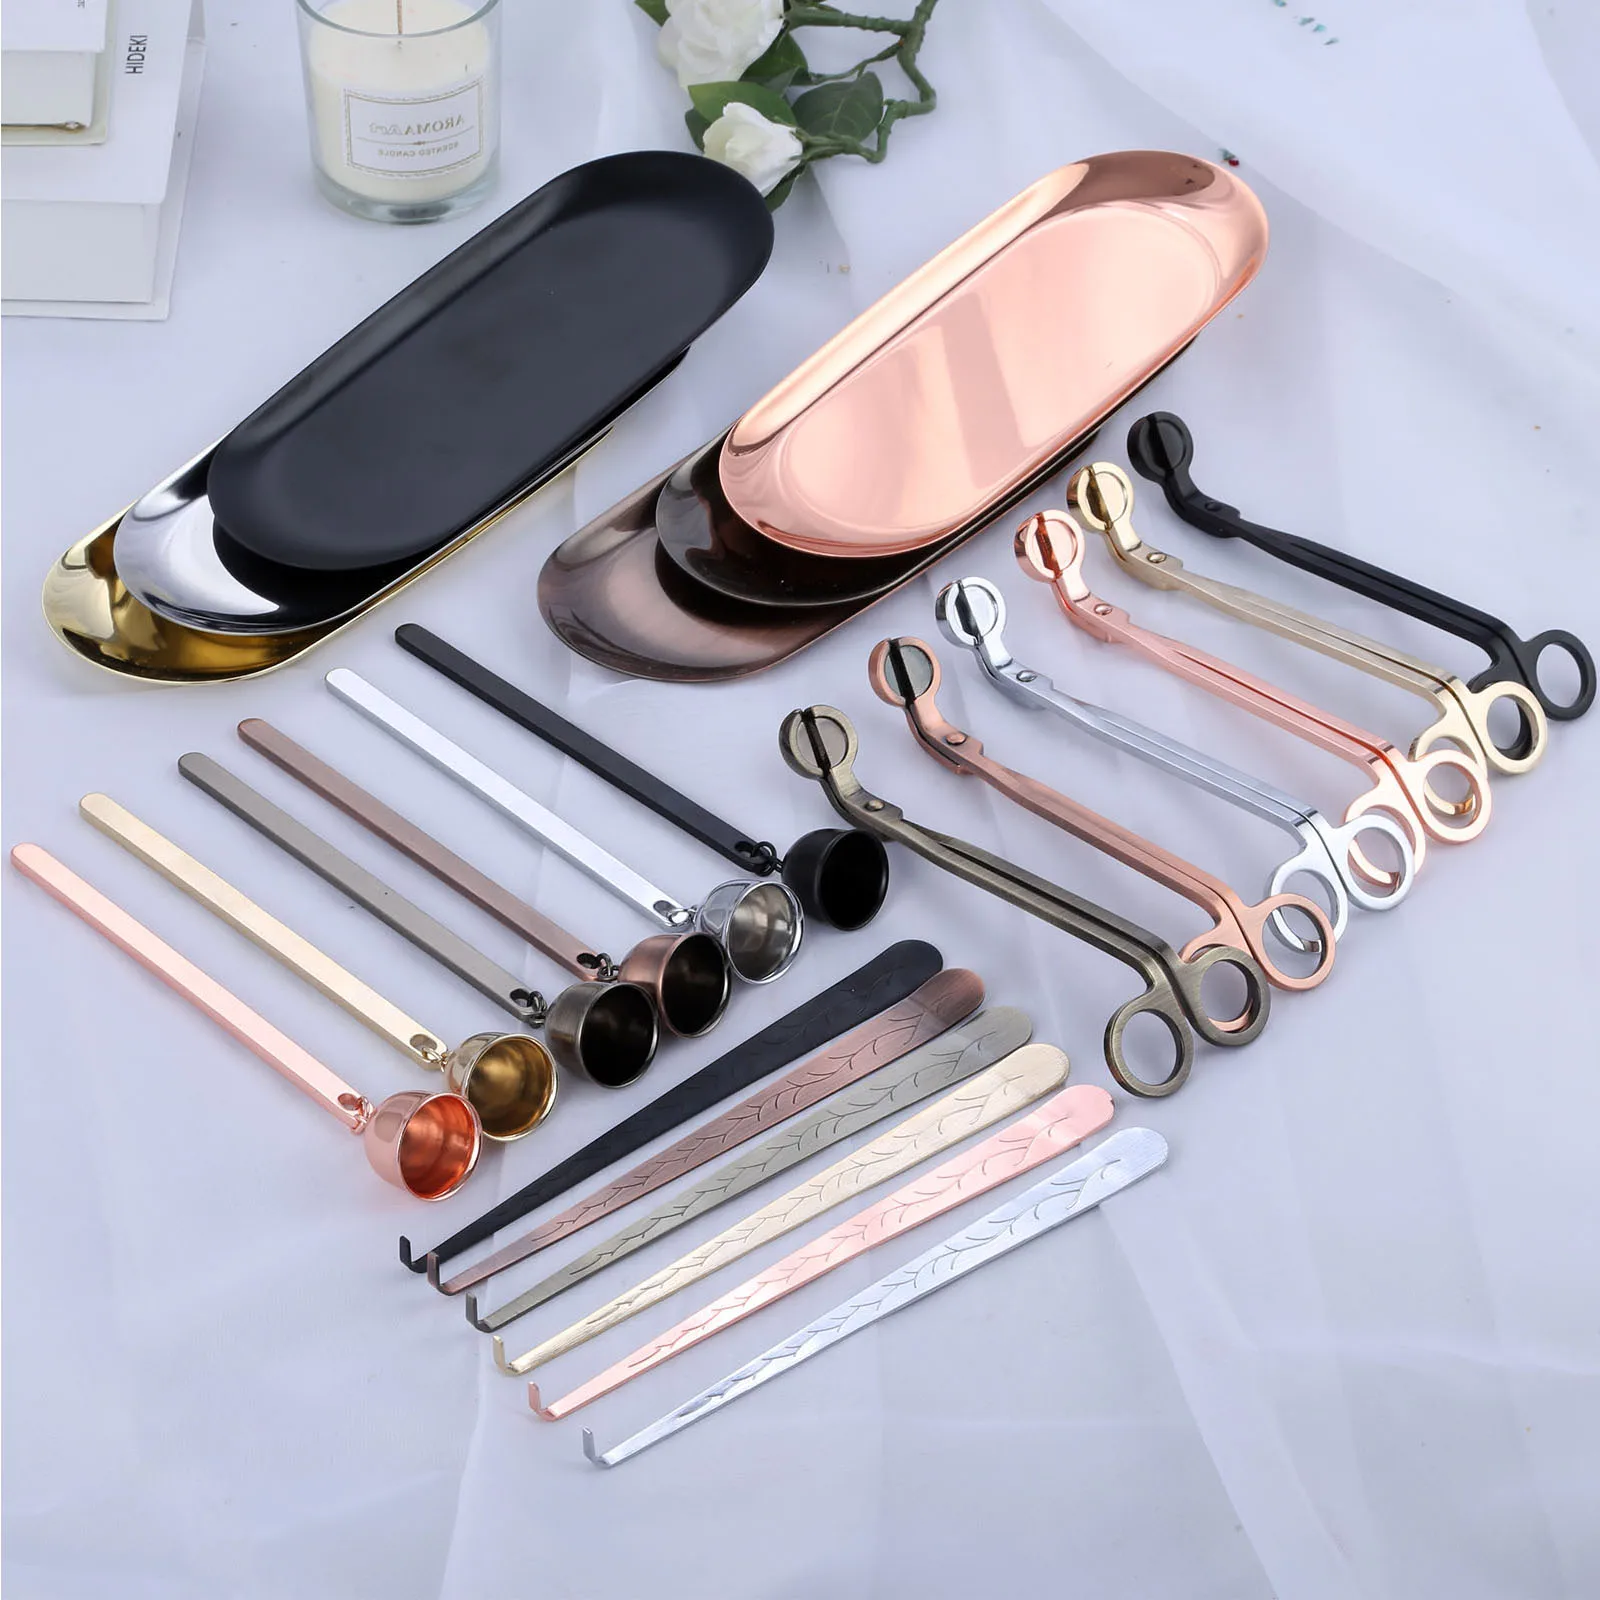 

4Pcs/set Metal Candle Accessories Candle Wicks Trimmer Cutter Scissors Candle Snuffer Trimmer Hook Dipper Extinguisher Tool Tray